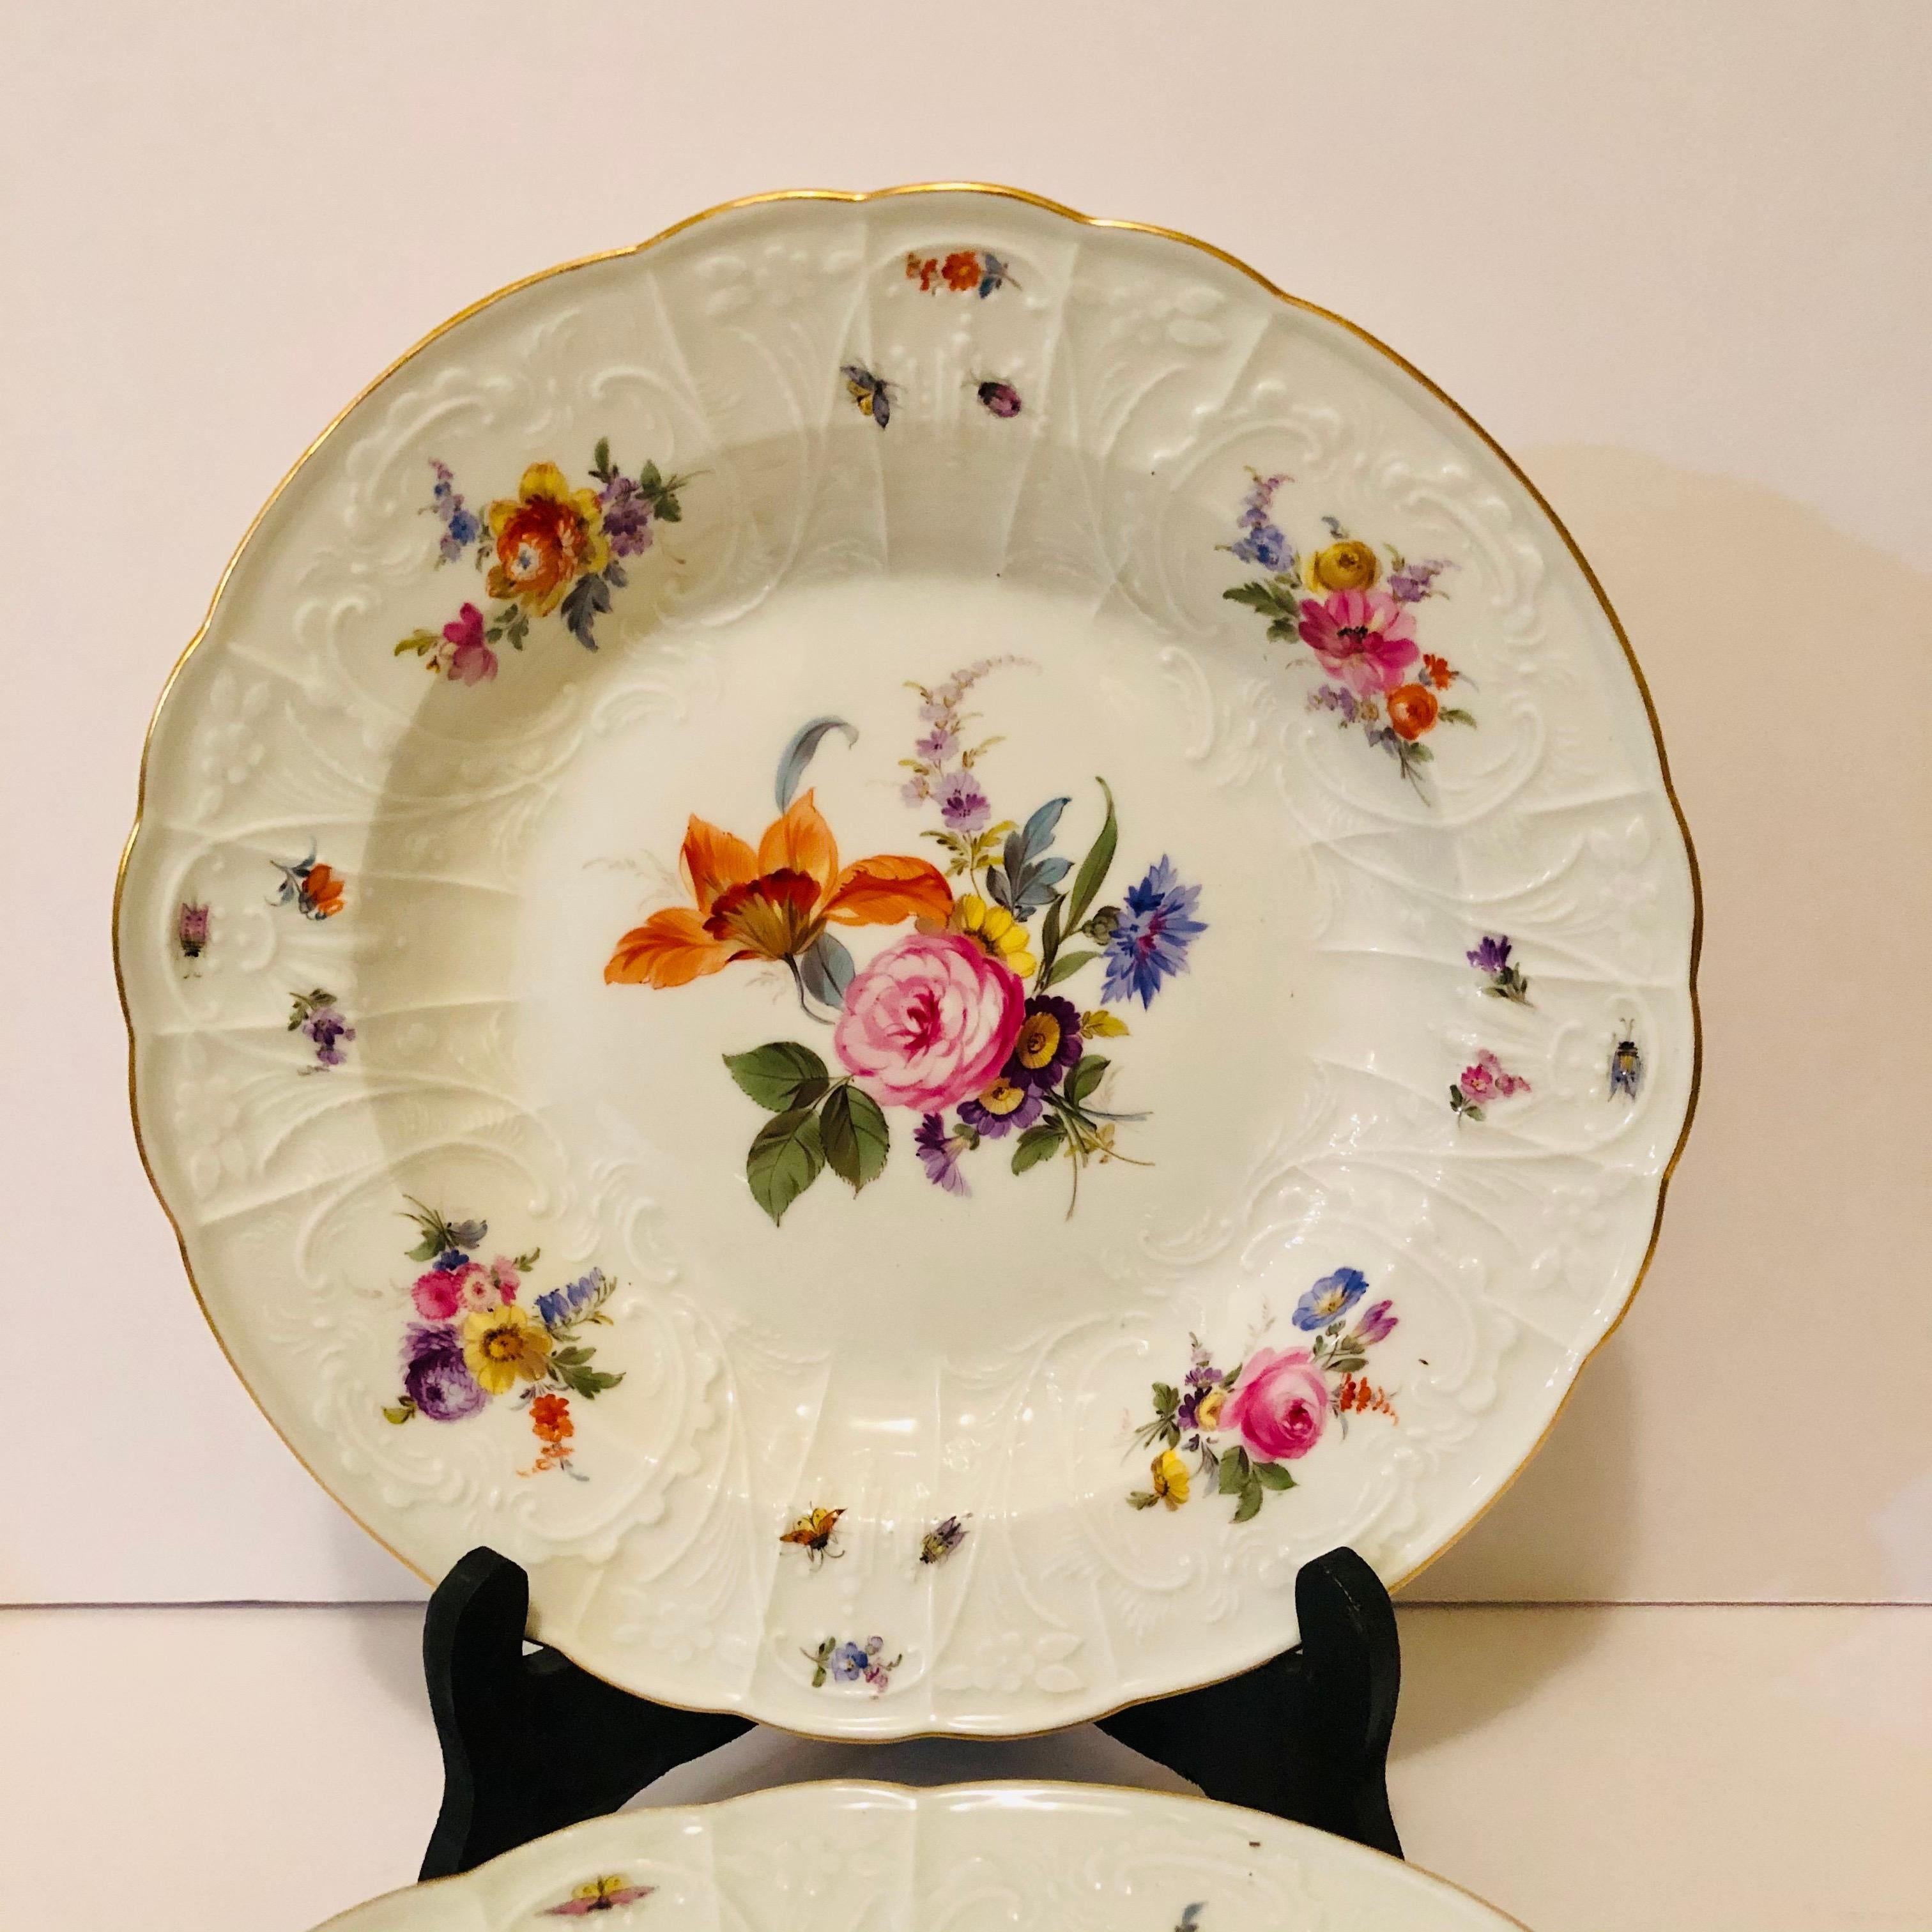 Late 19th Century Pair of Meissen Museum Quality Bowls Painted with Flower Bouquets and Insects